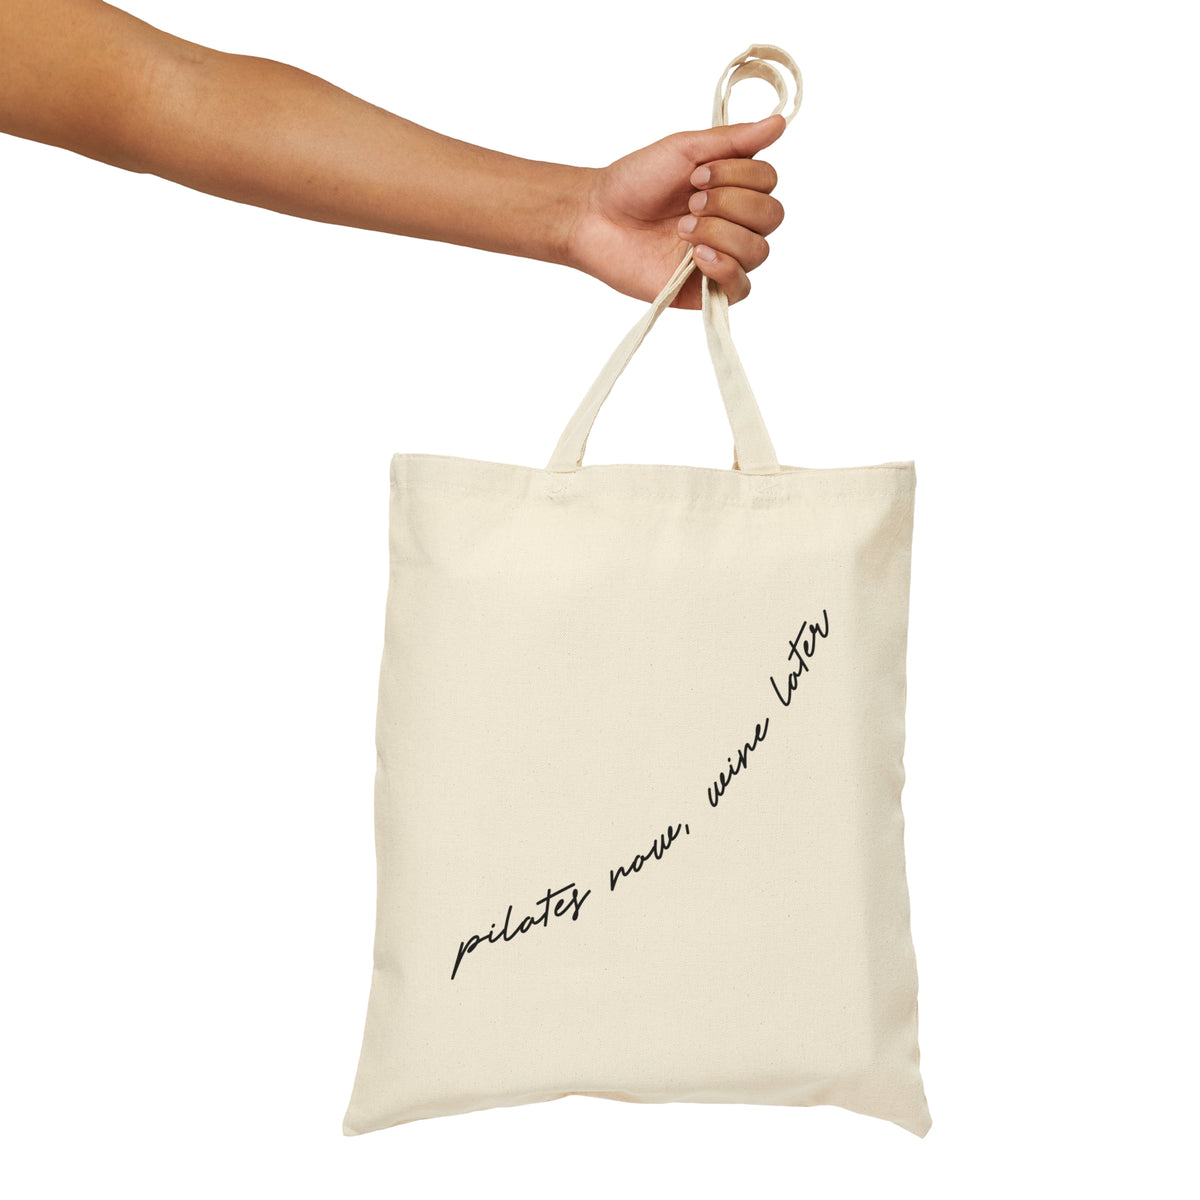 Pilates Now Wine Later Canvas Tote